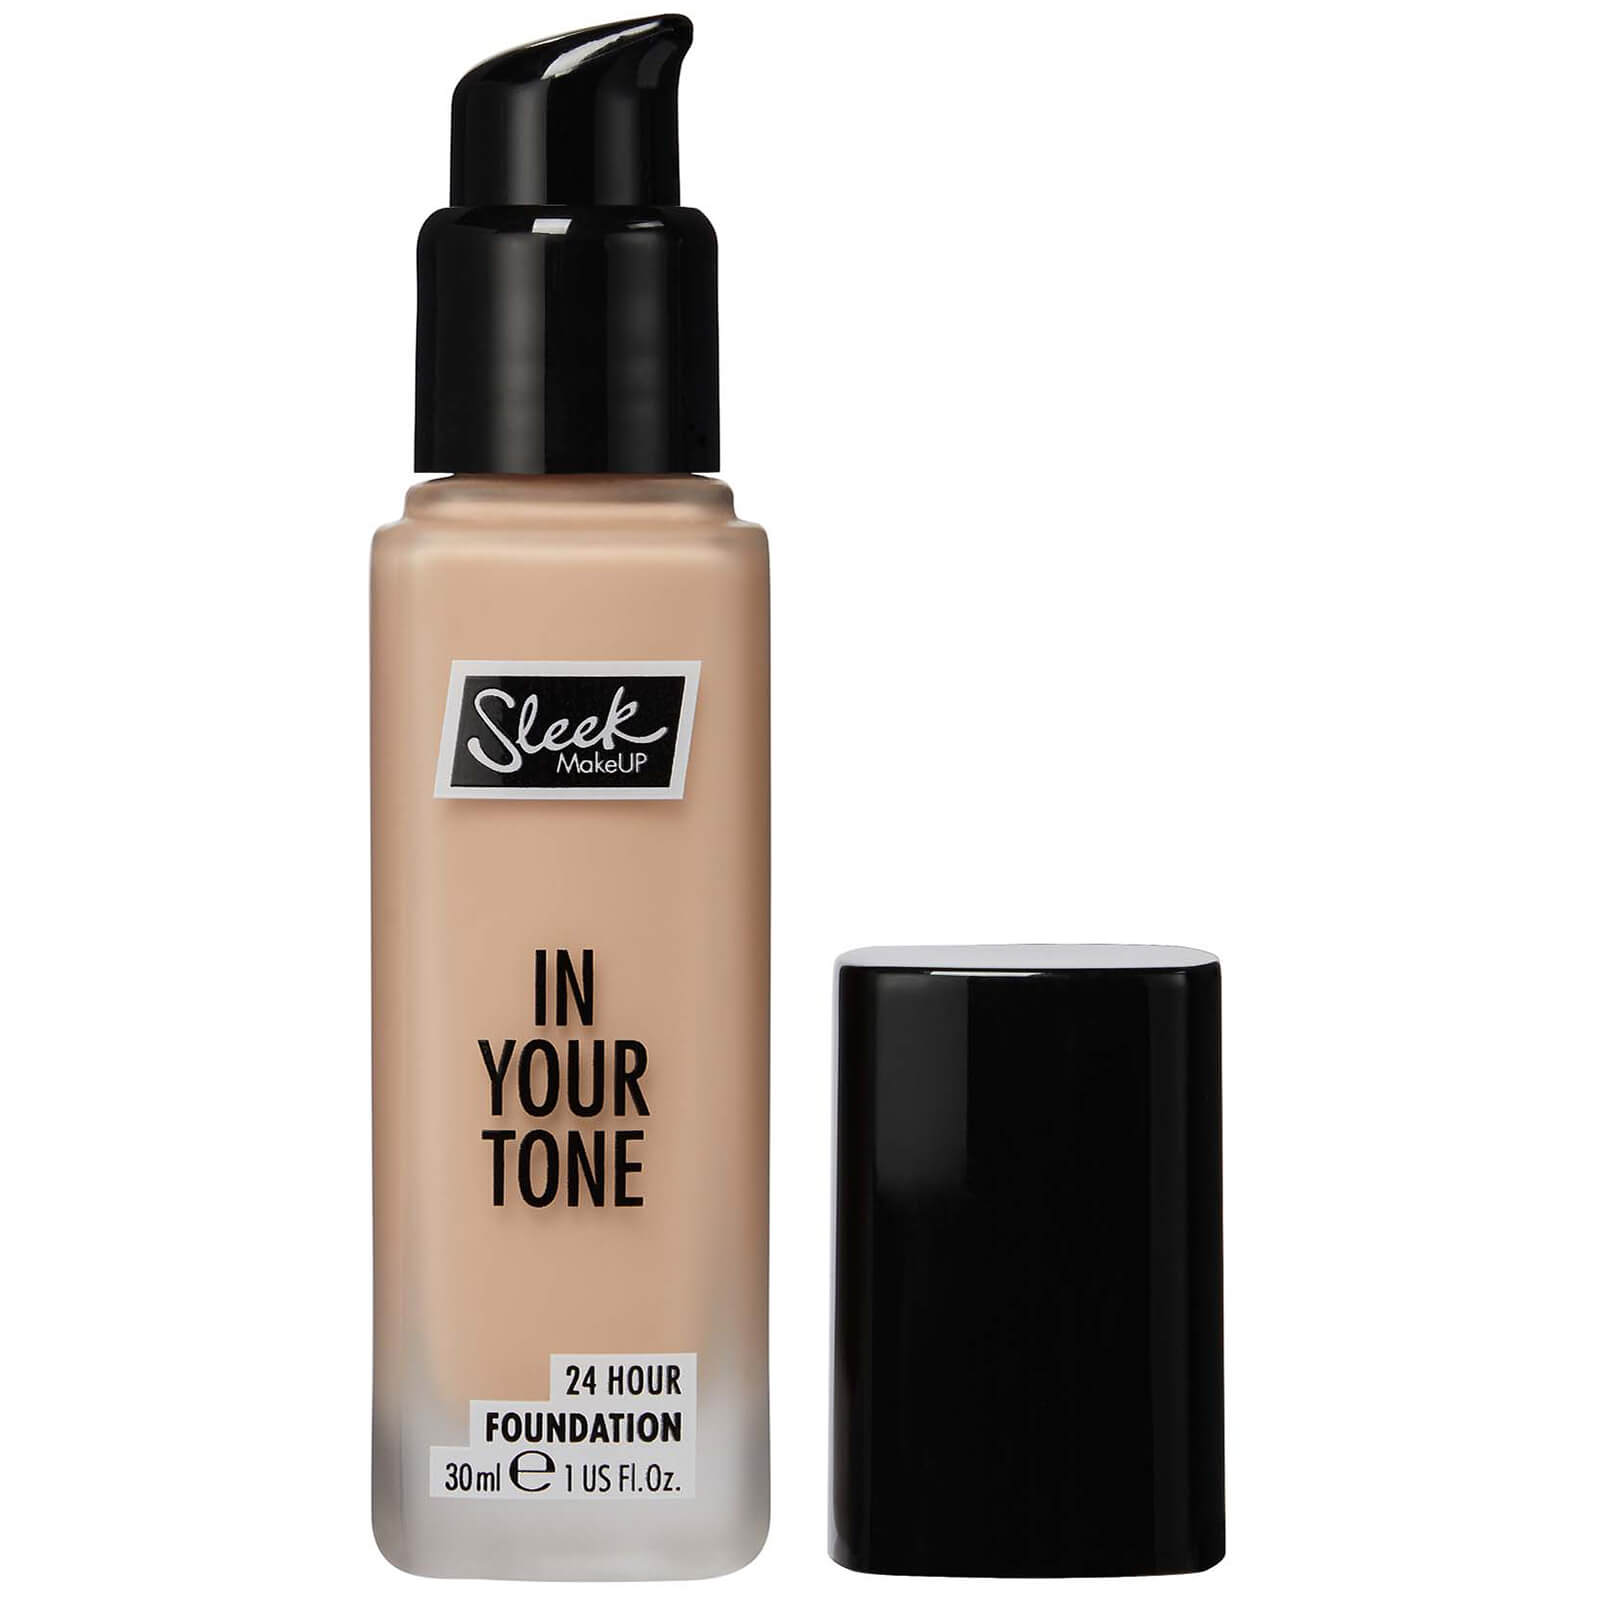 Sleek MakeUP in Your Tone 24 Hour Foundation 30ml (Various Shades) - 4C